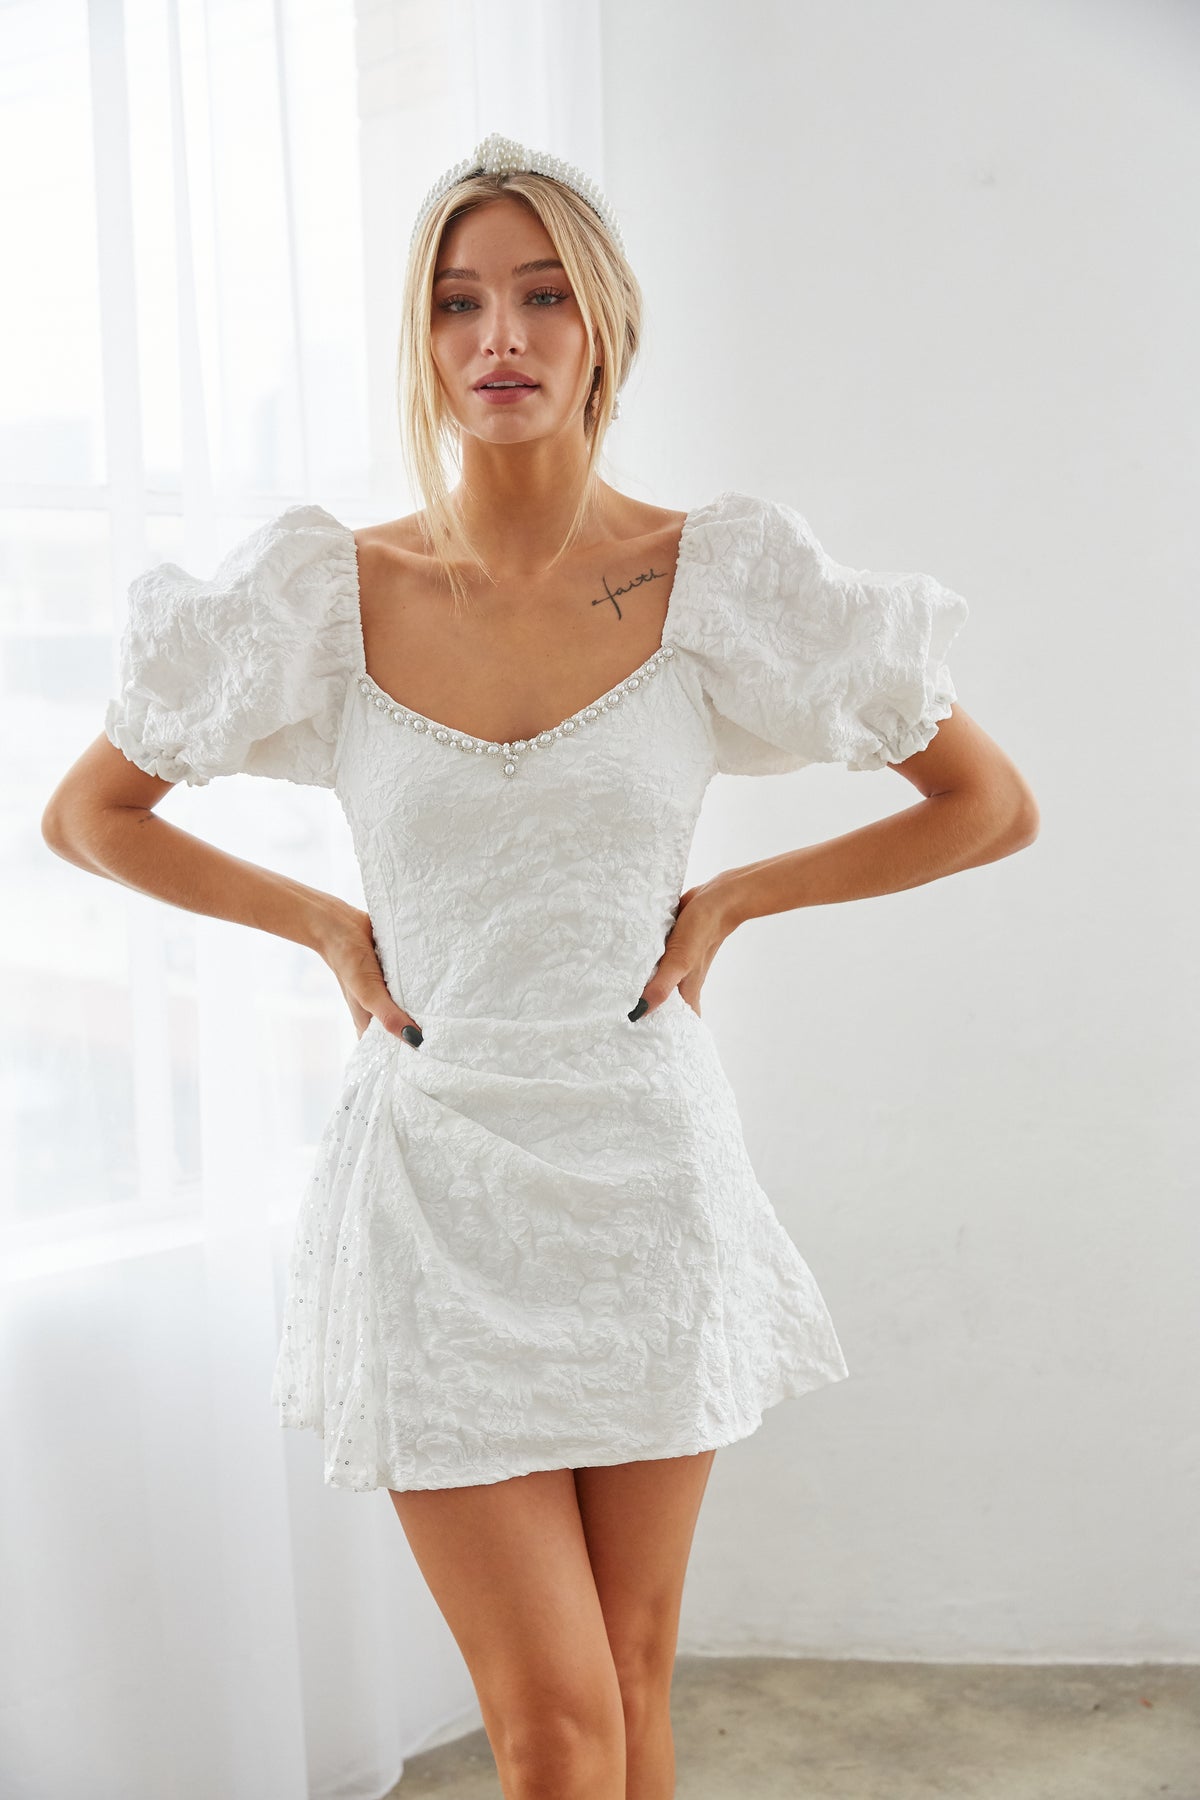 dress for a bride to be - white lace puff sleeve dress - white dress with pearl neckline - bachelorette outfit inspo